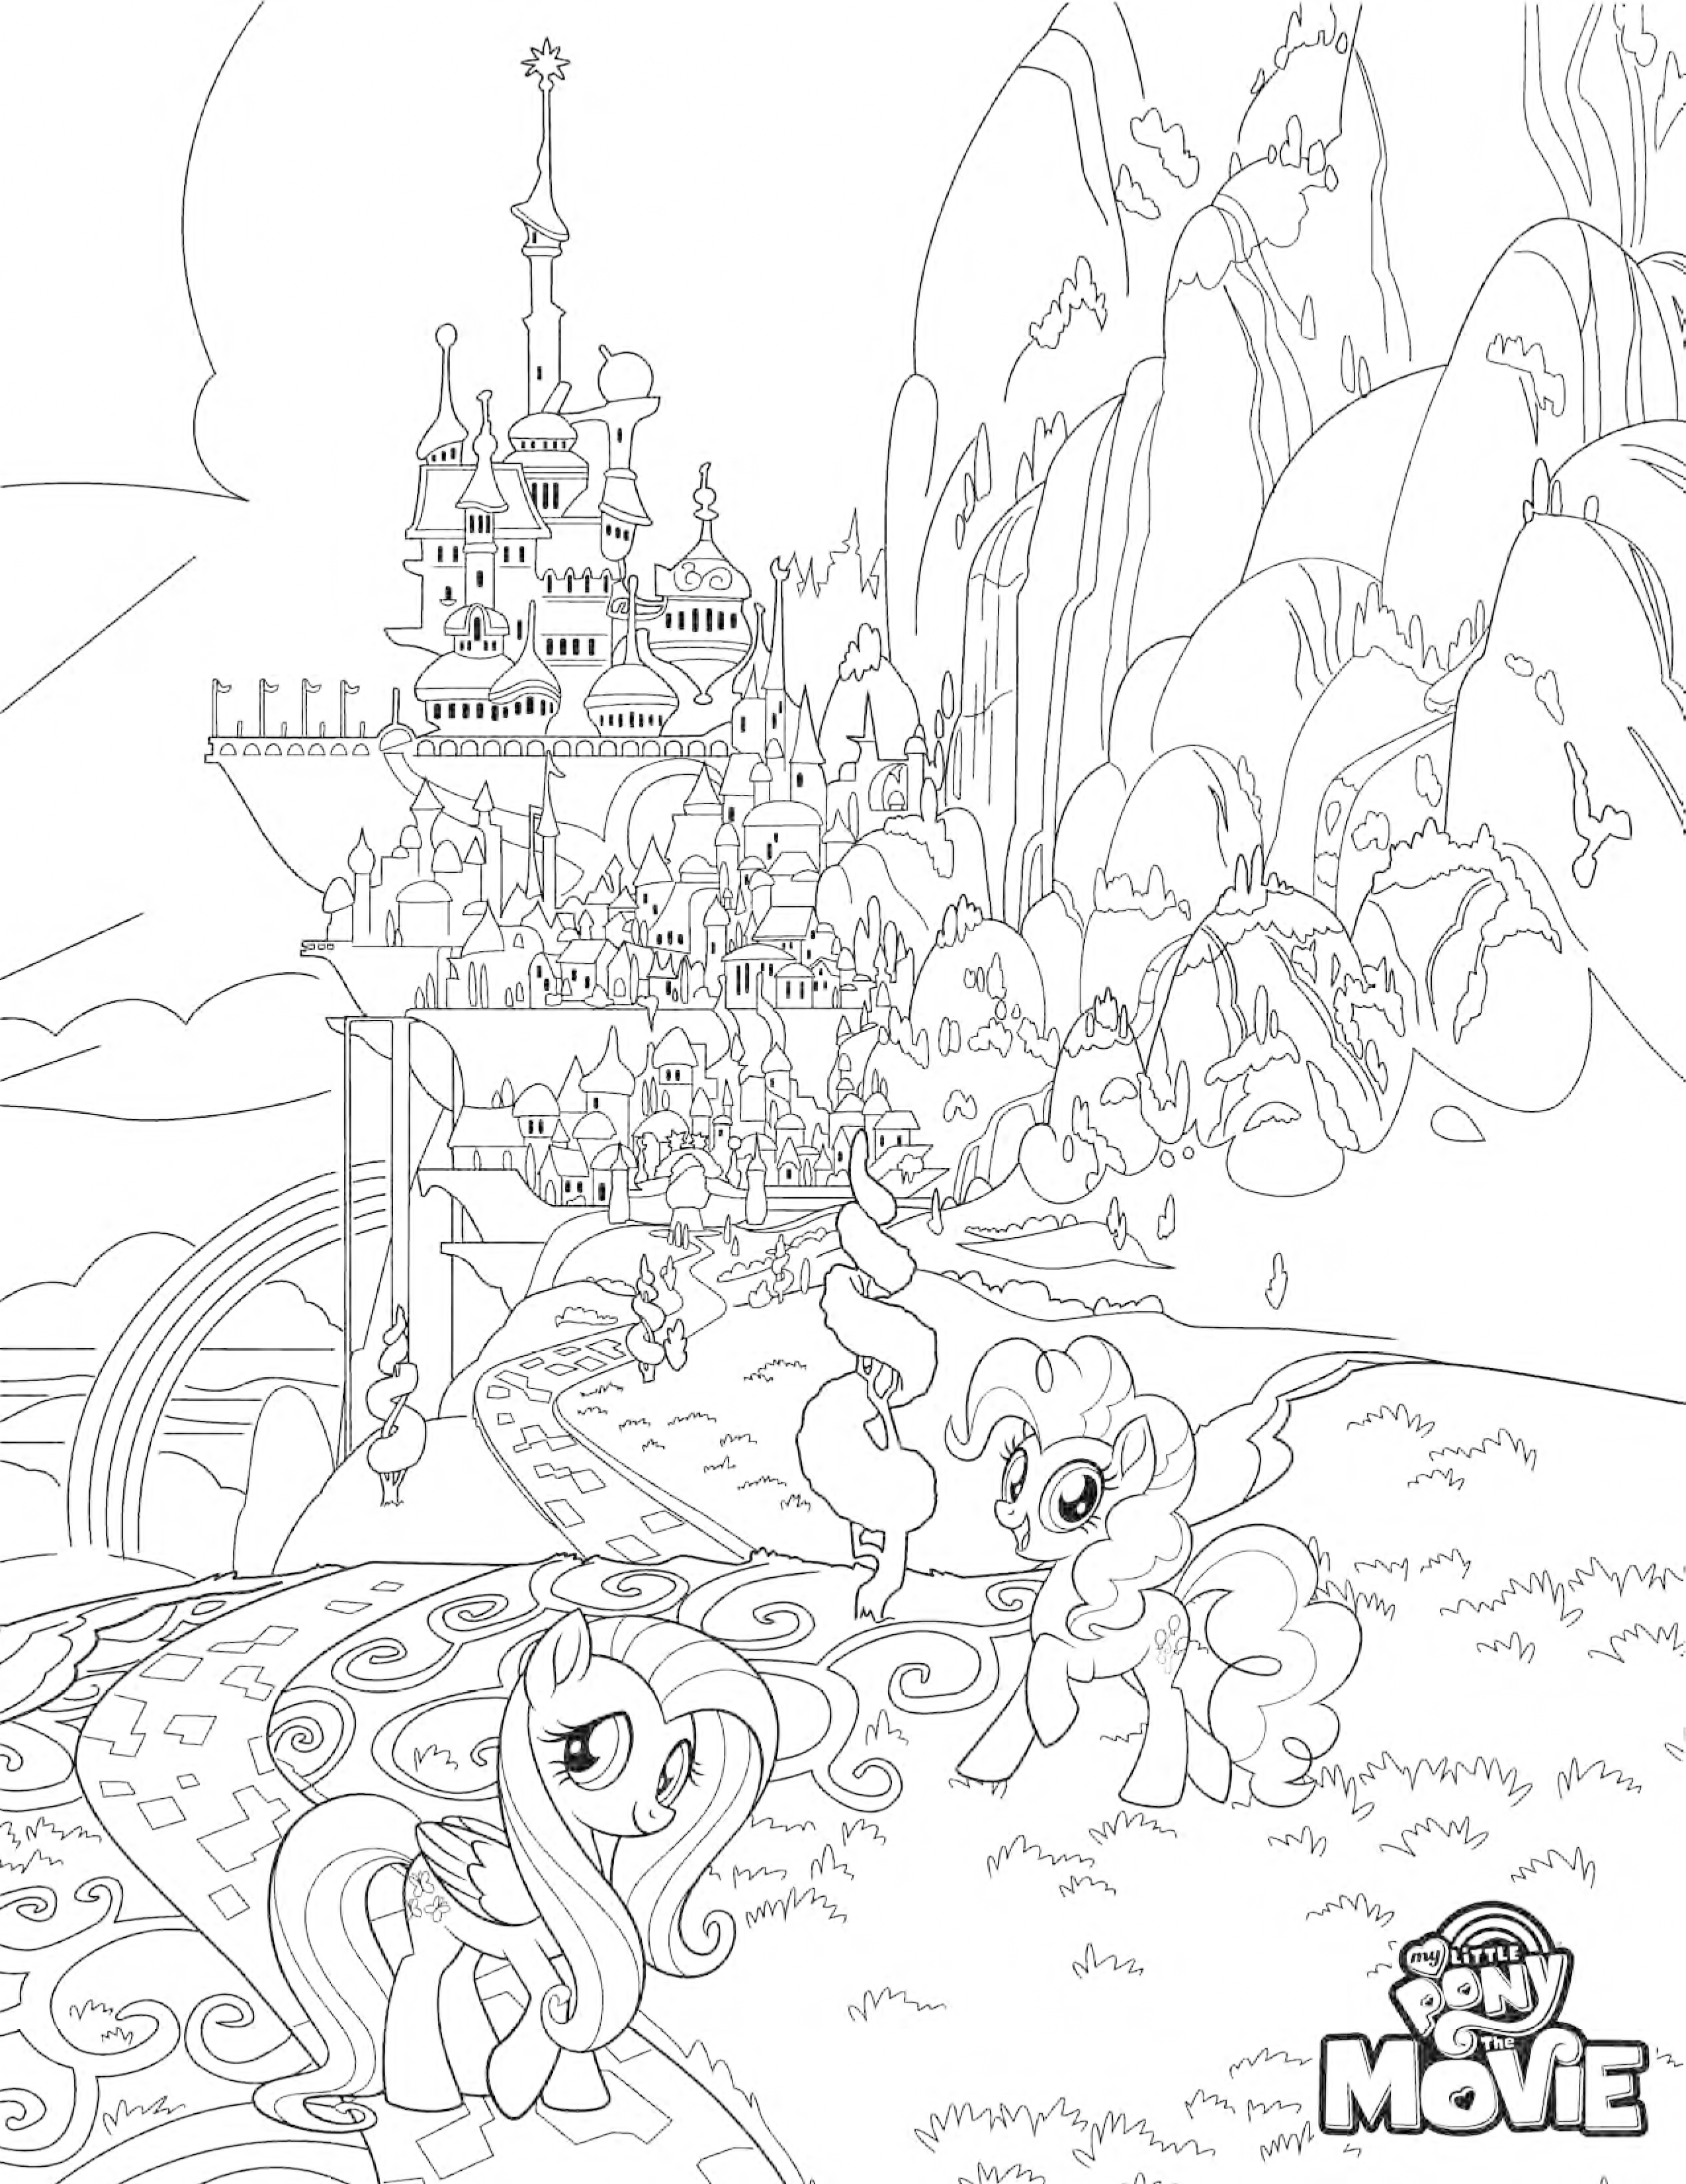 My Little Pony: The Movie coloring pages - YouLoveIt.com